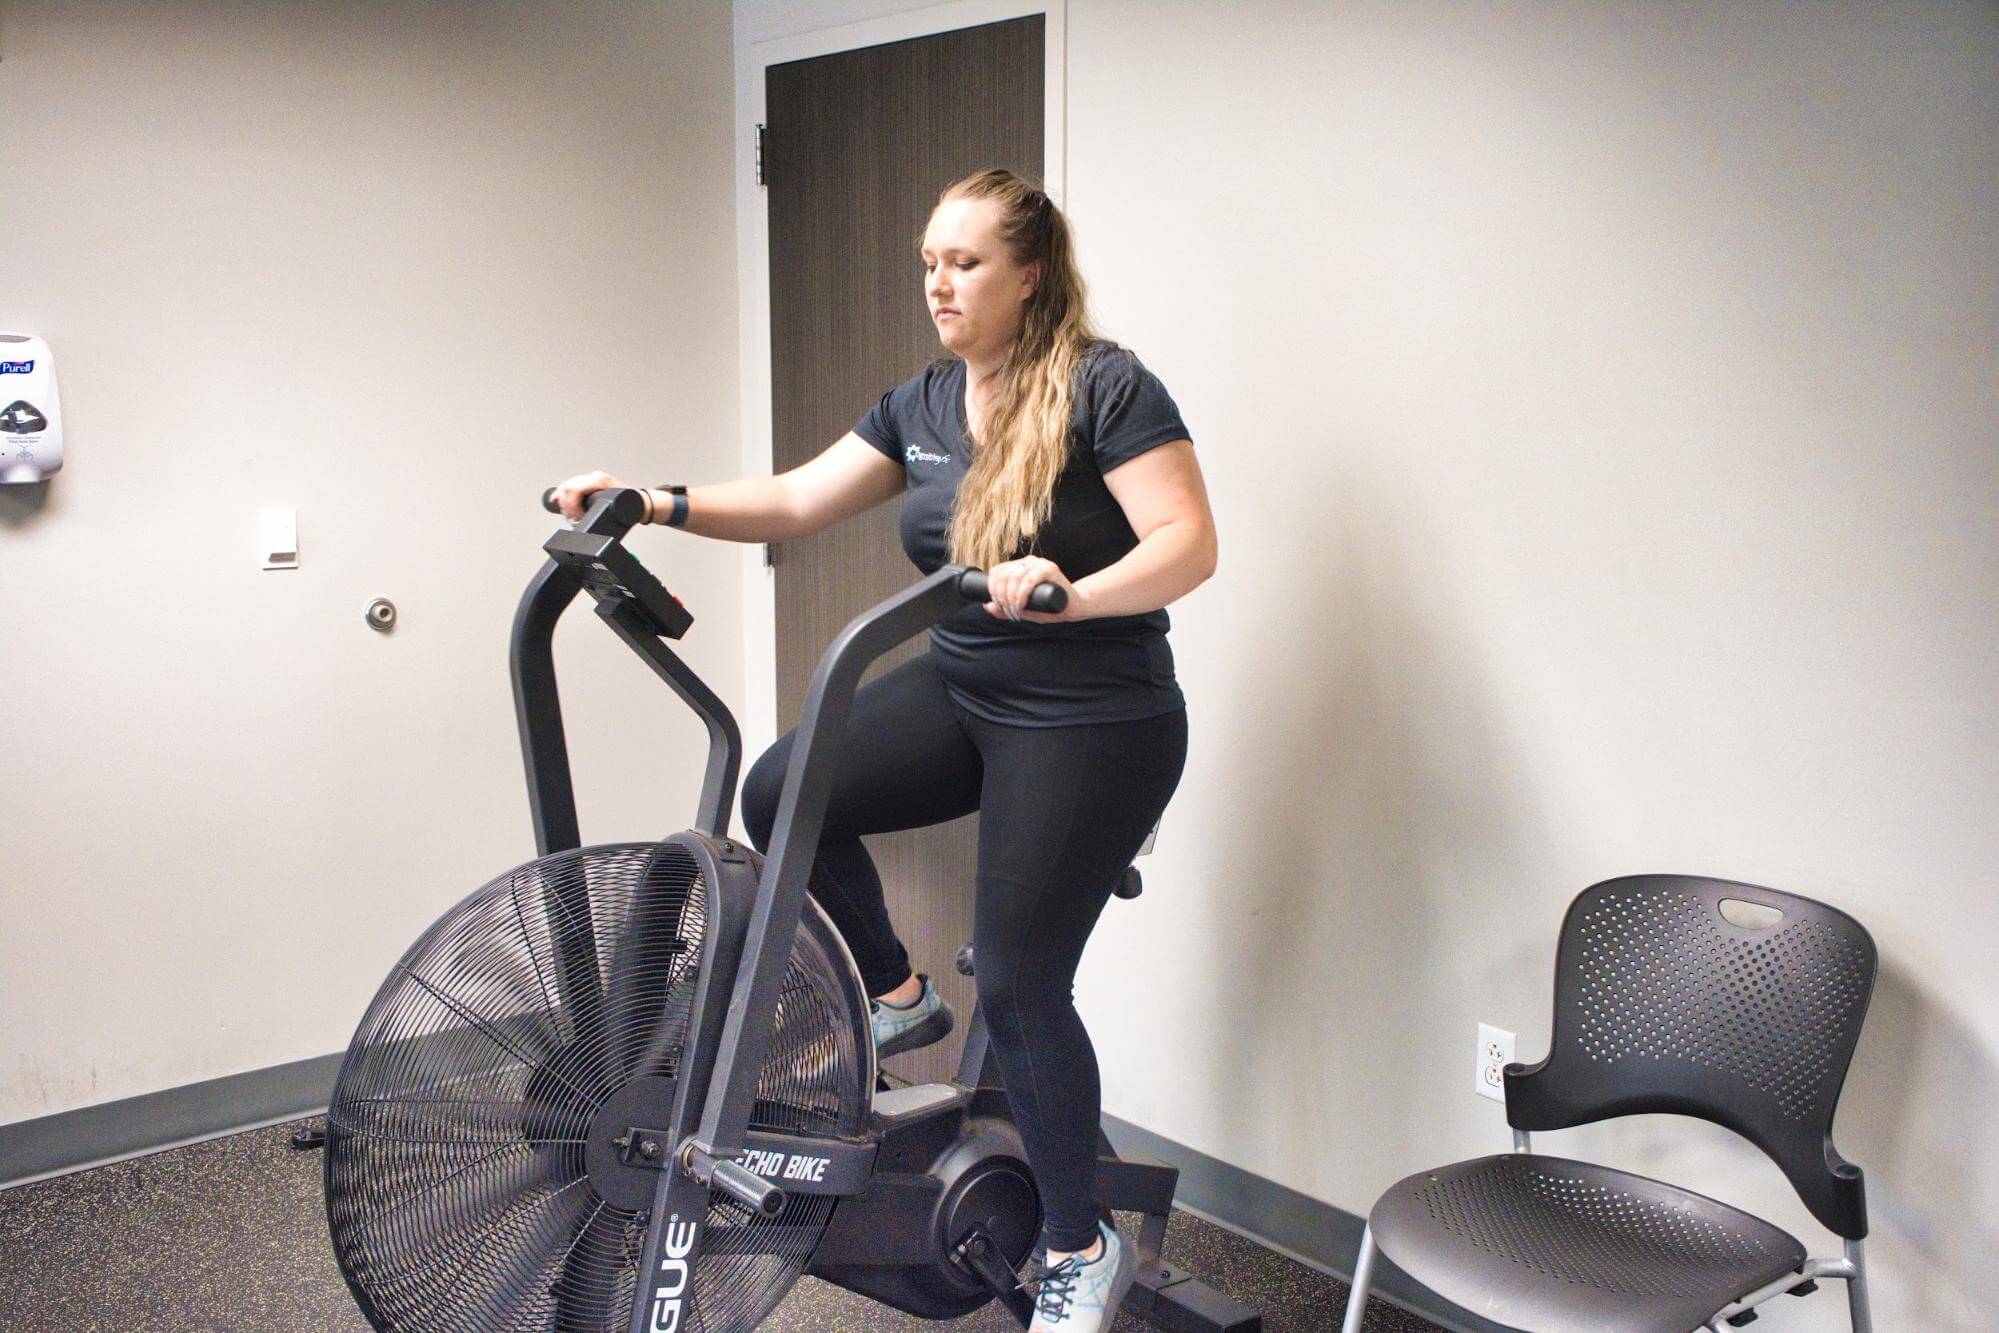 Patient doing cardio before therapy exercises. 